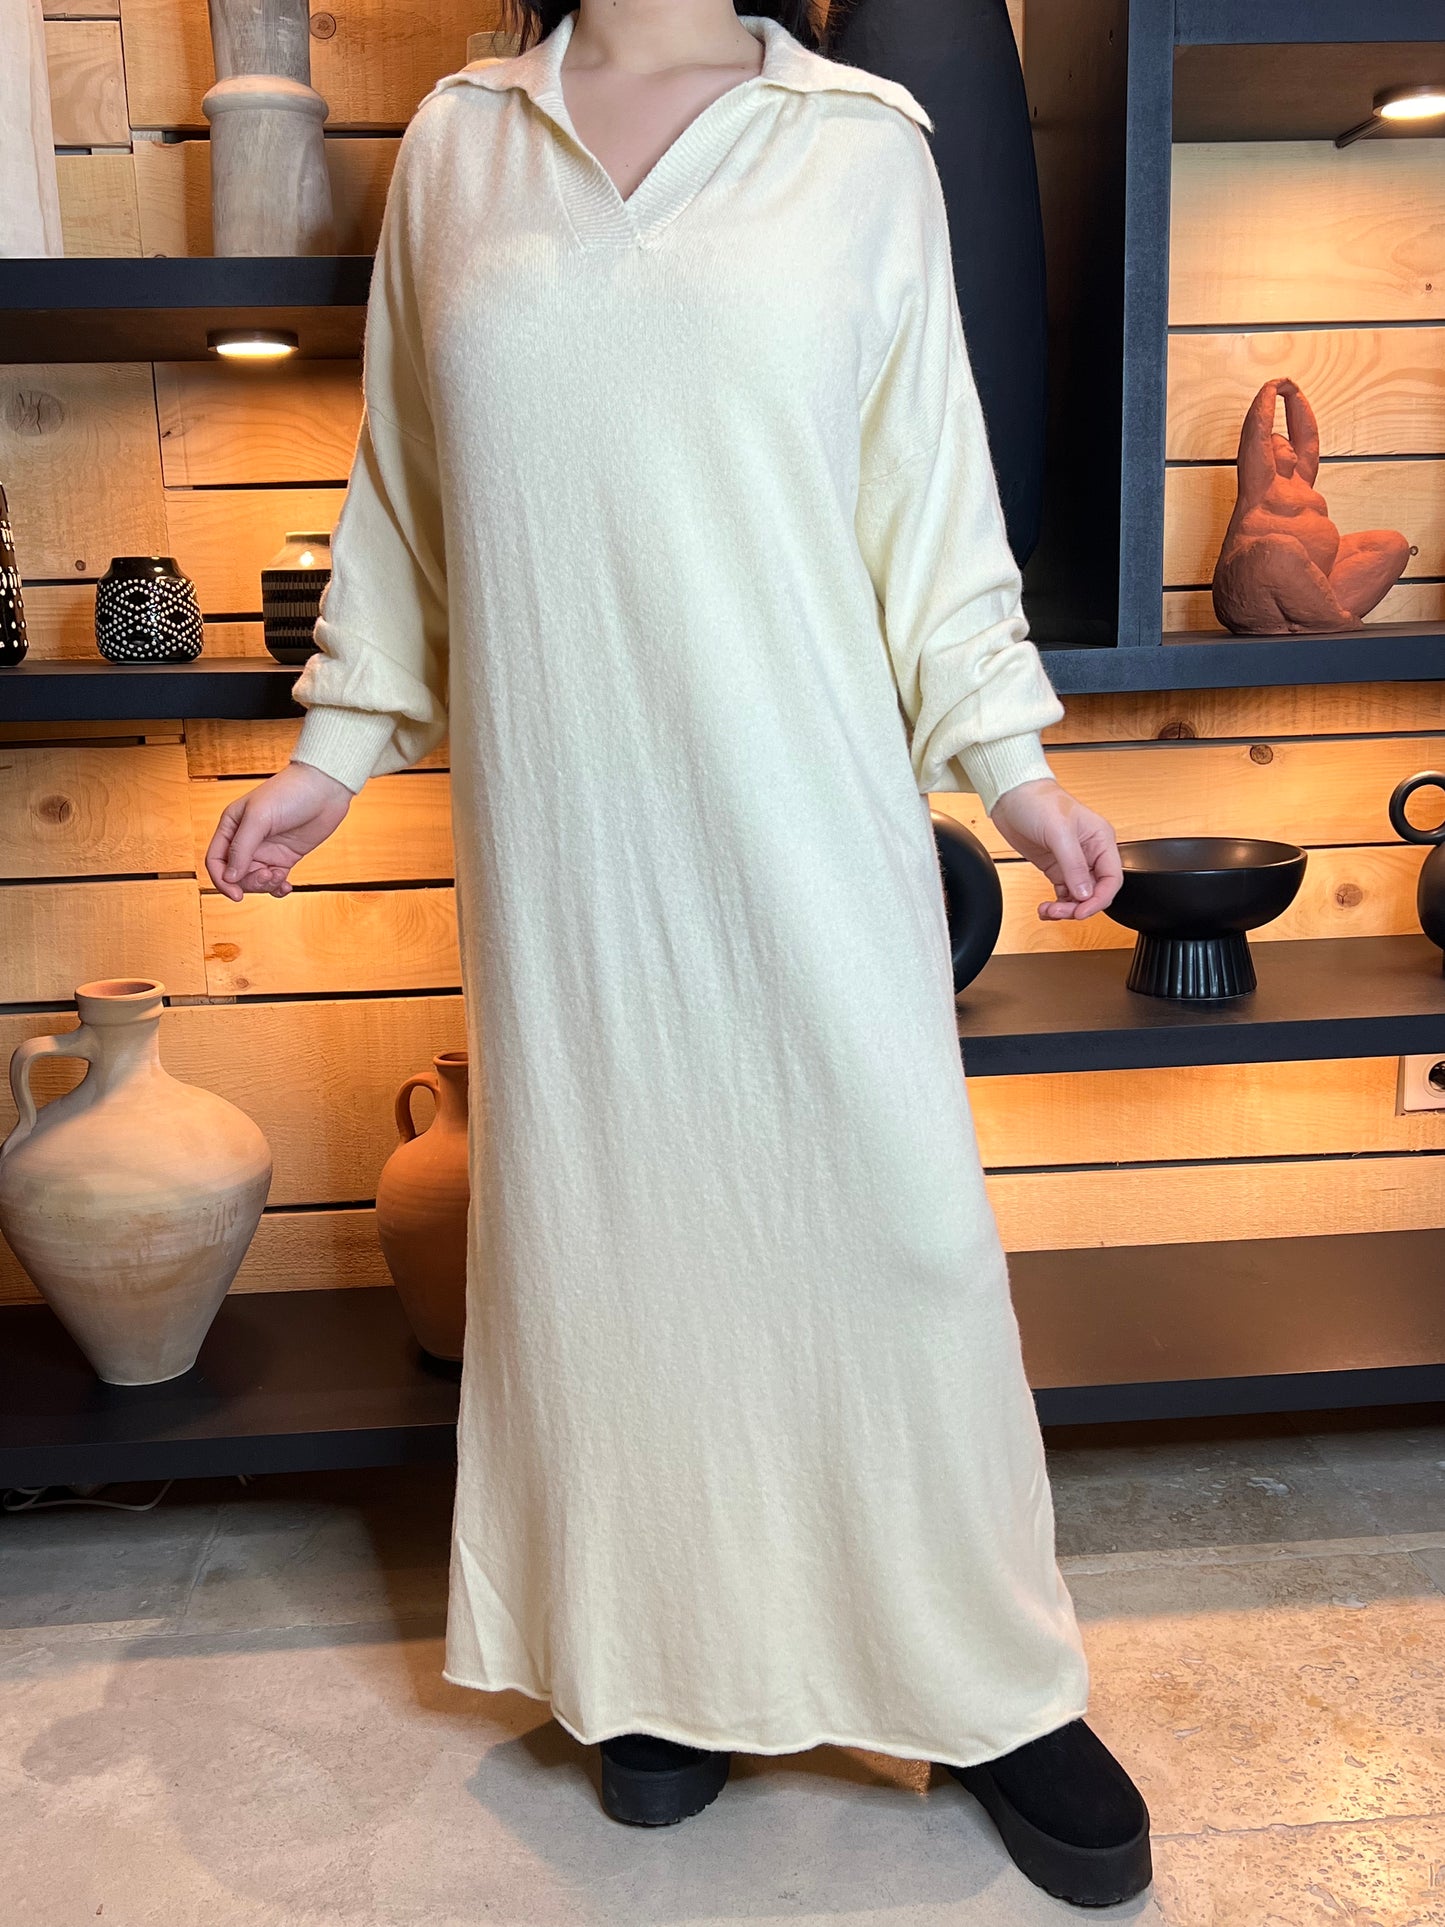 LALY - ROBE PULL OVERSIZE BLANC CASSE JUSQU'A LA TAILLE 50/52